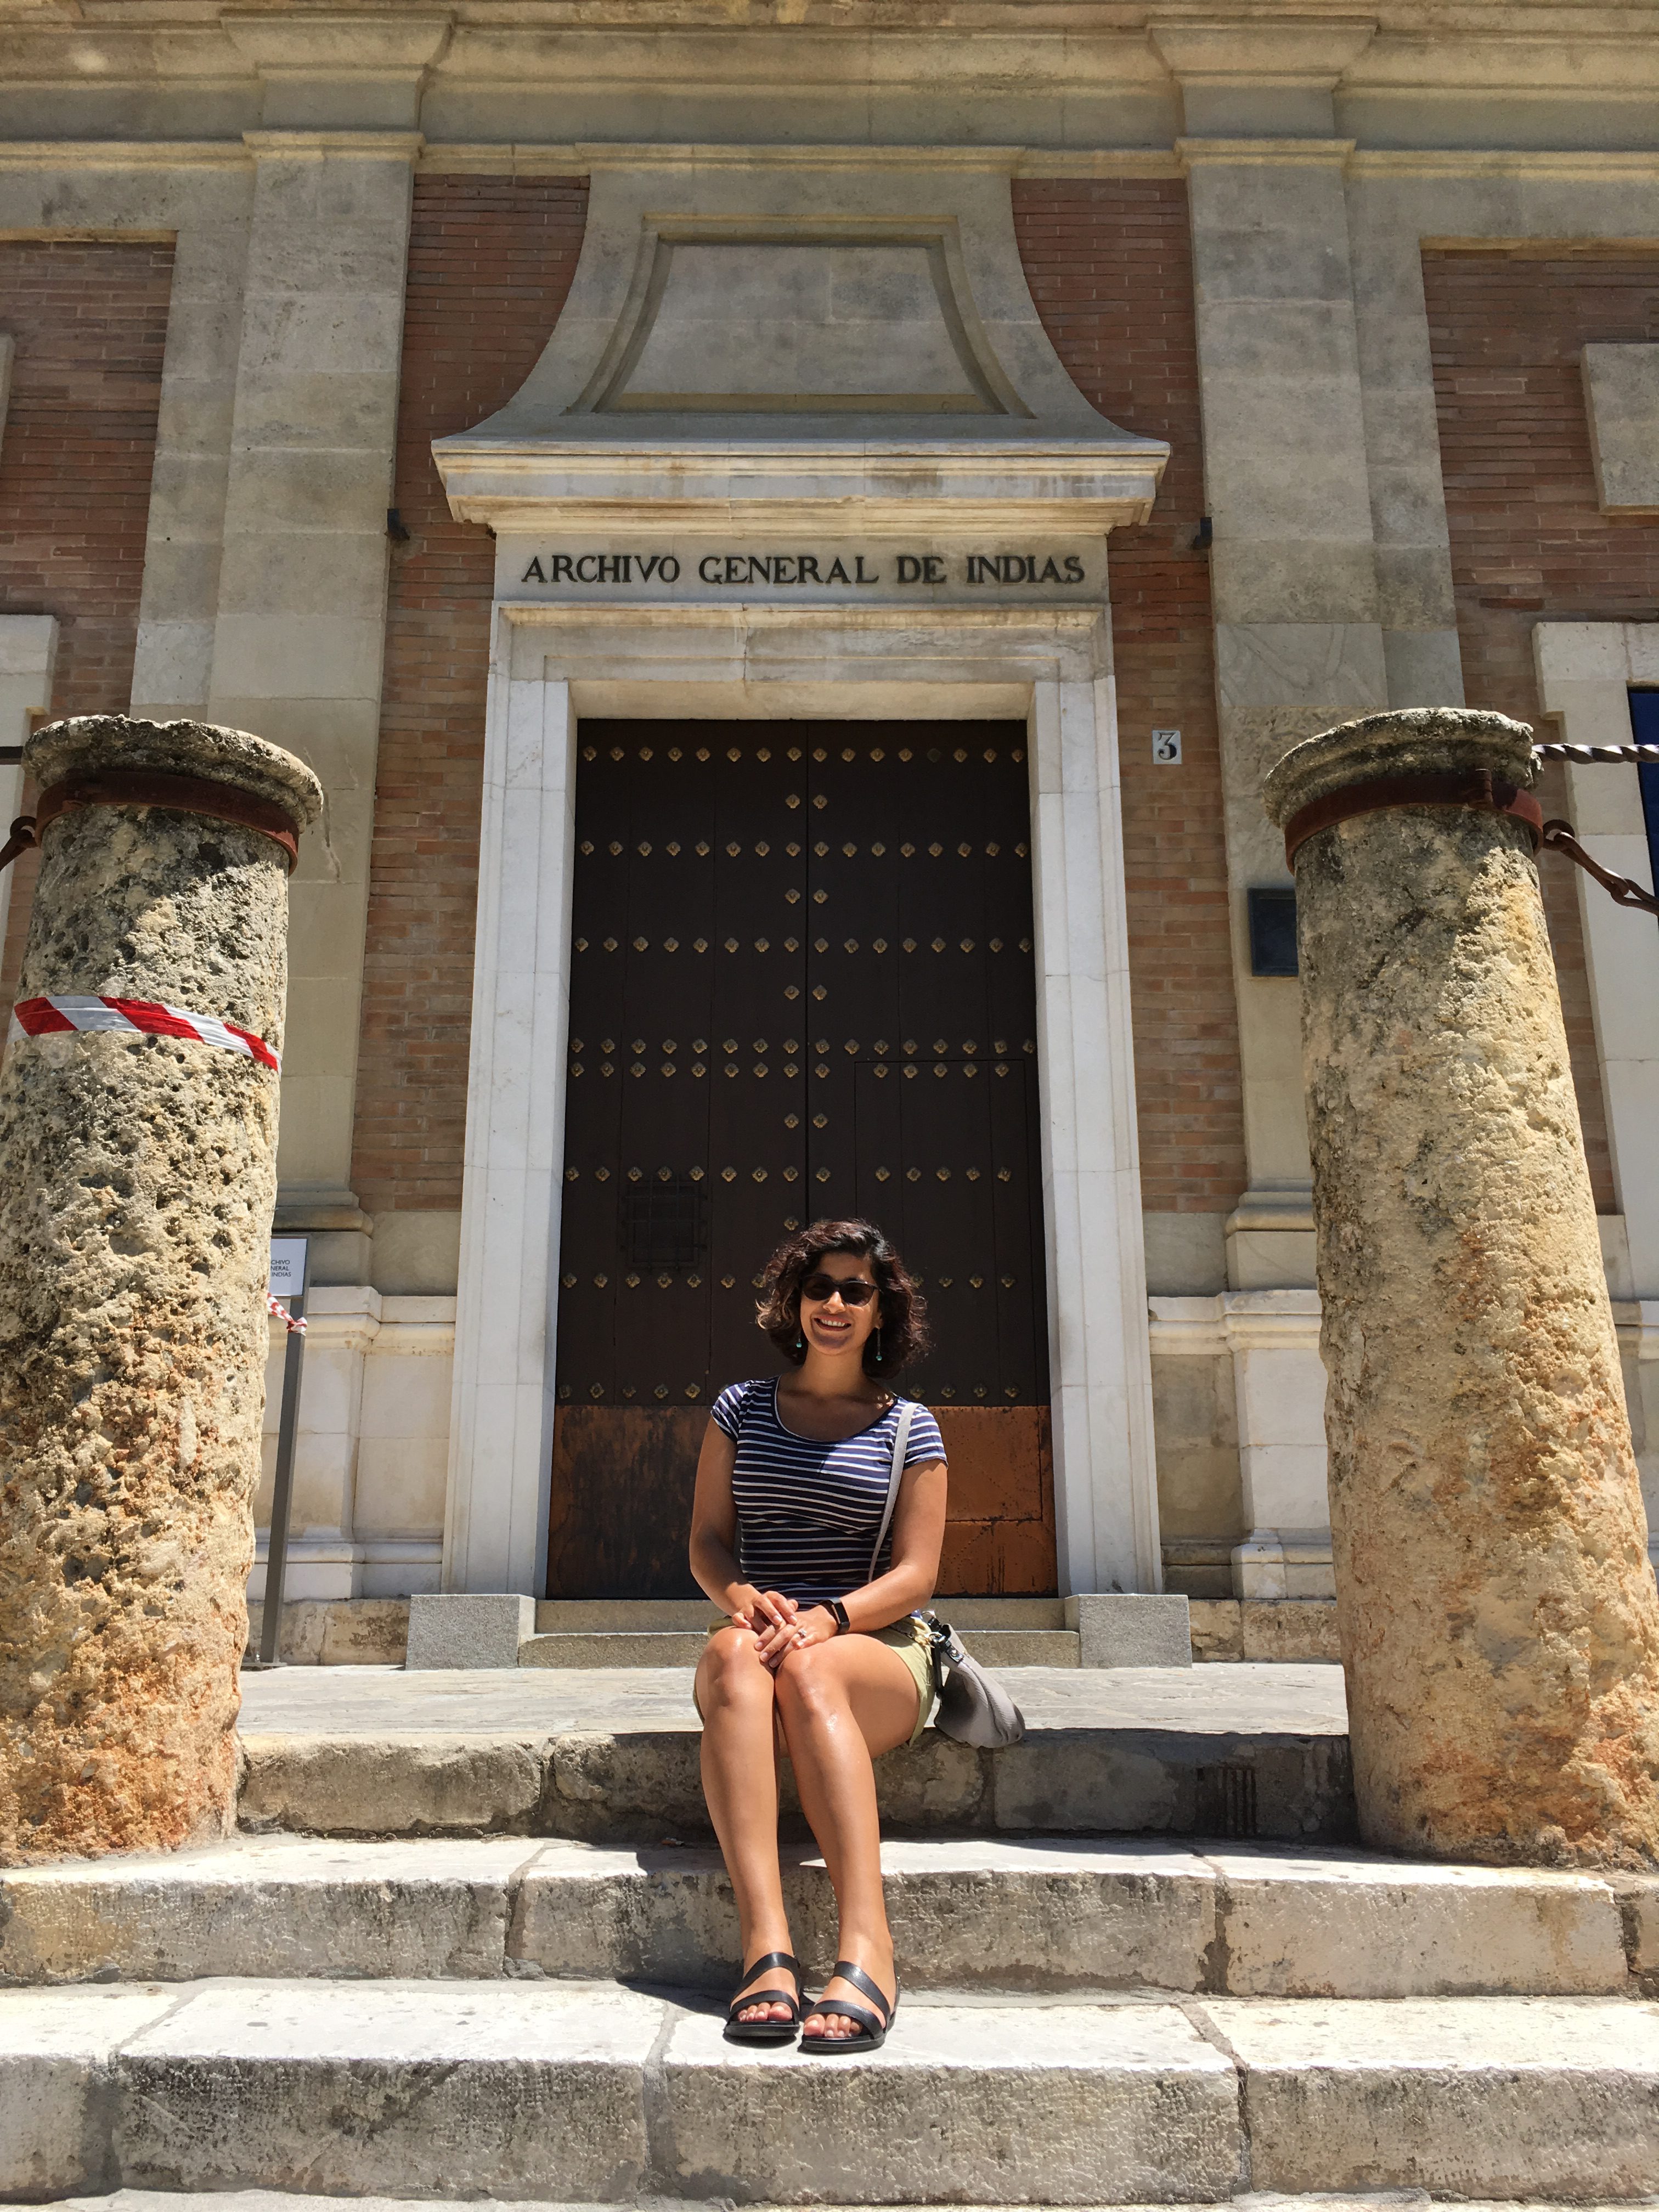 Andreina Soto sitting on the steps of Archivo General De Indias